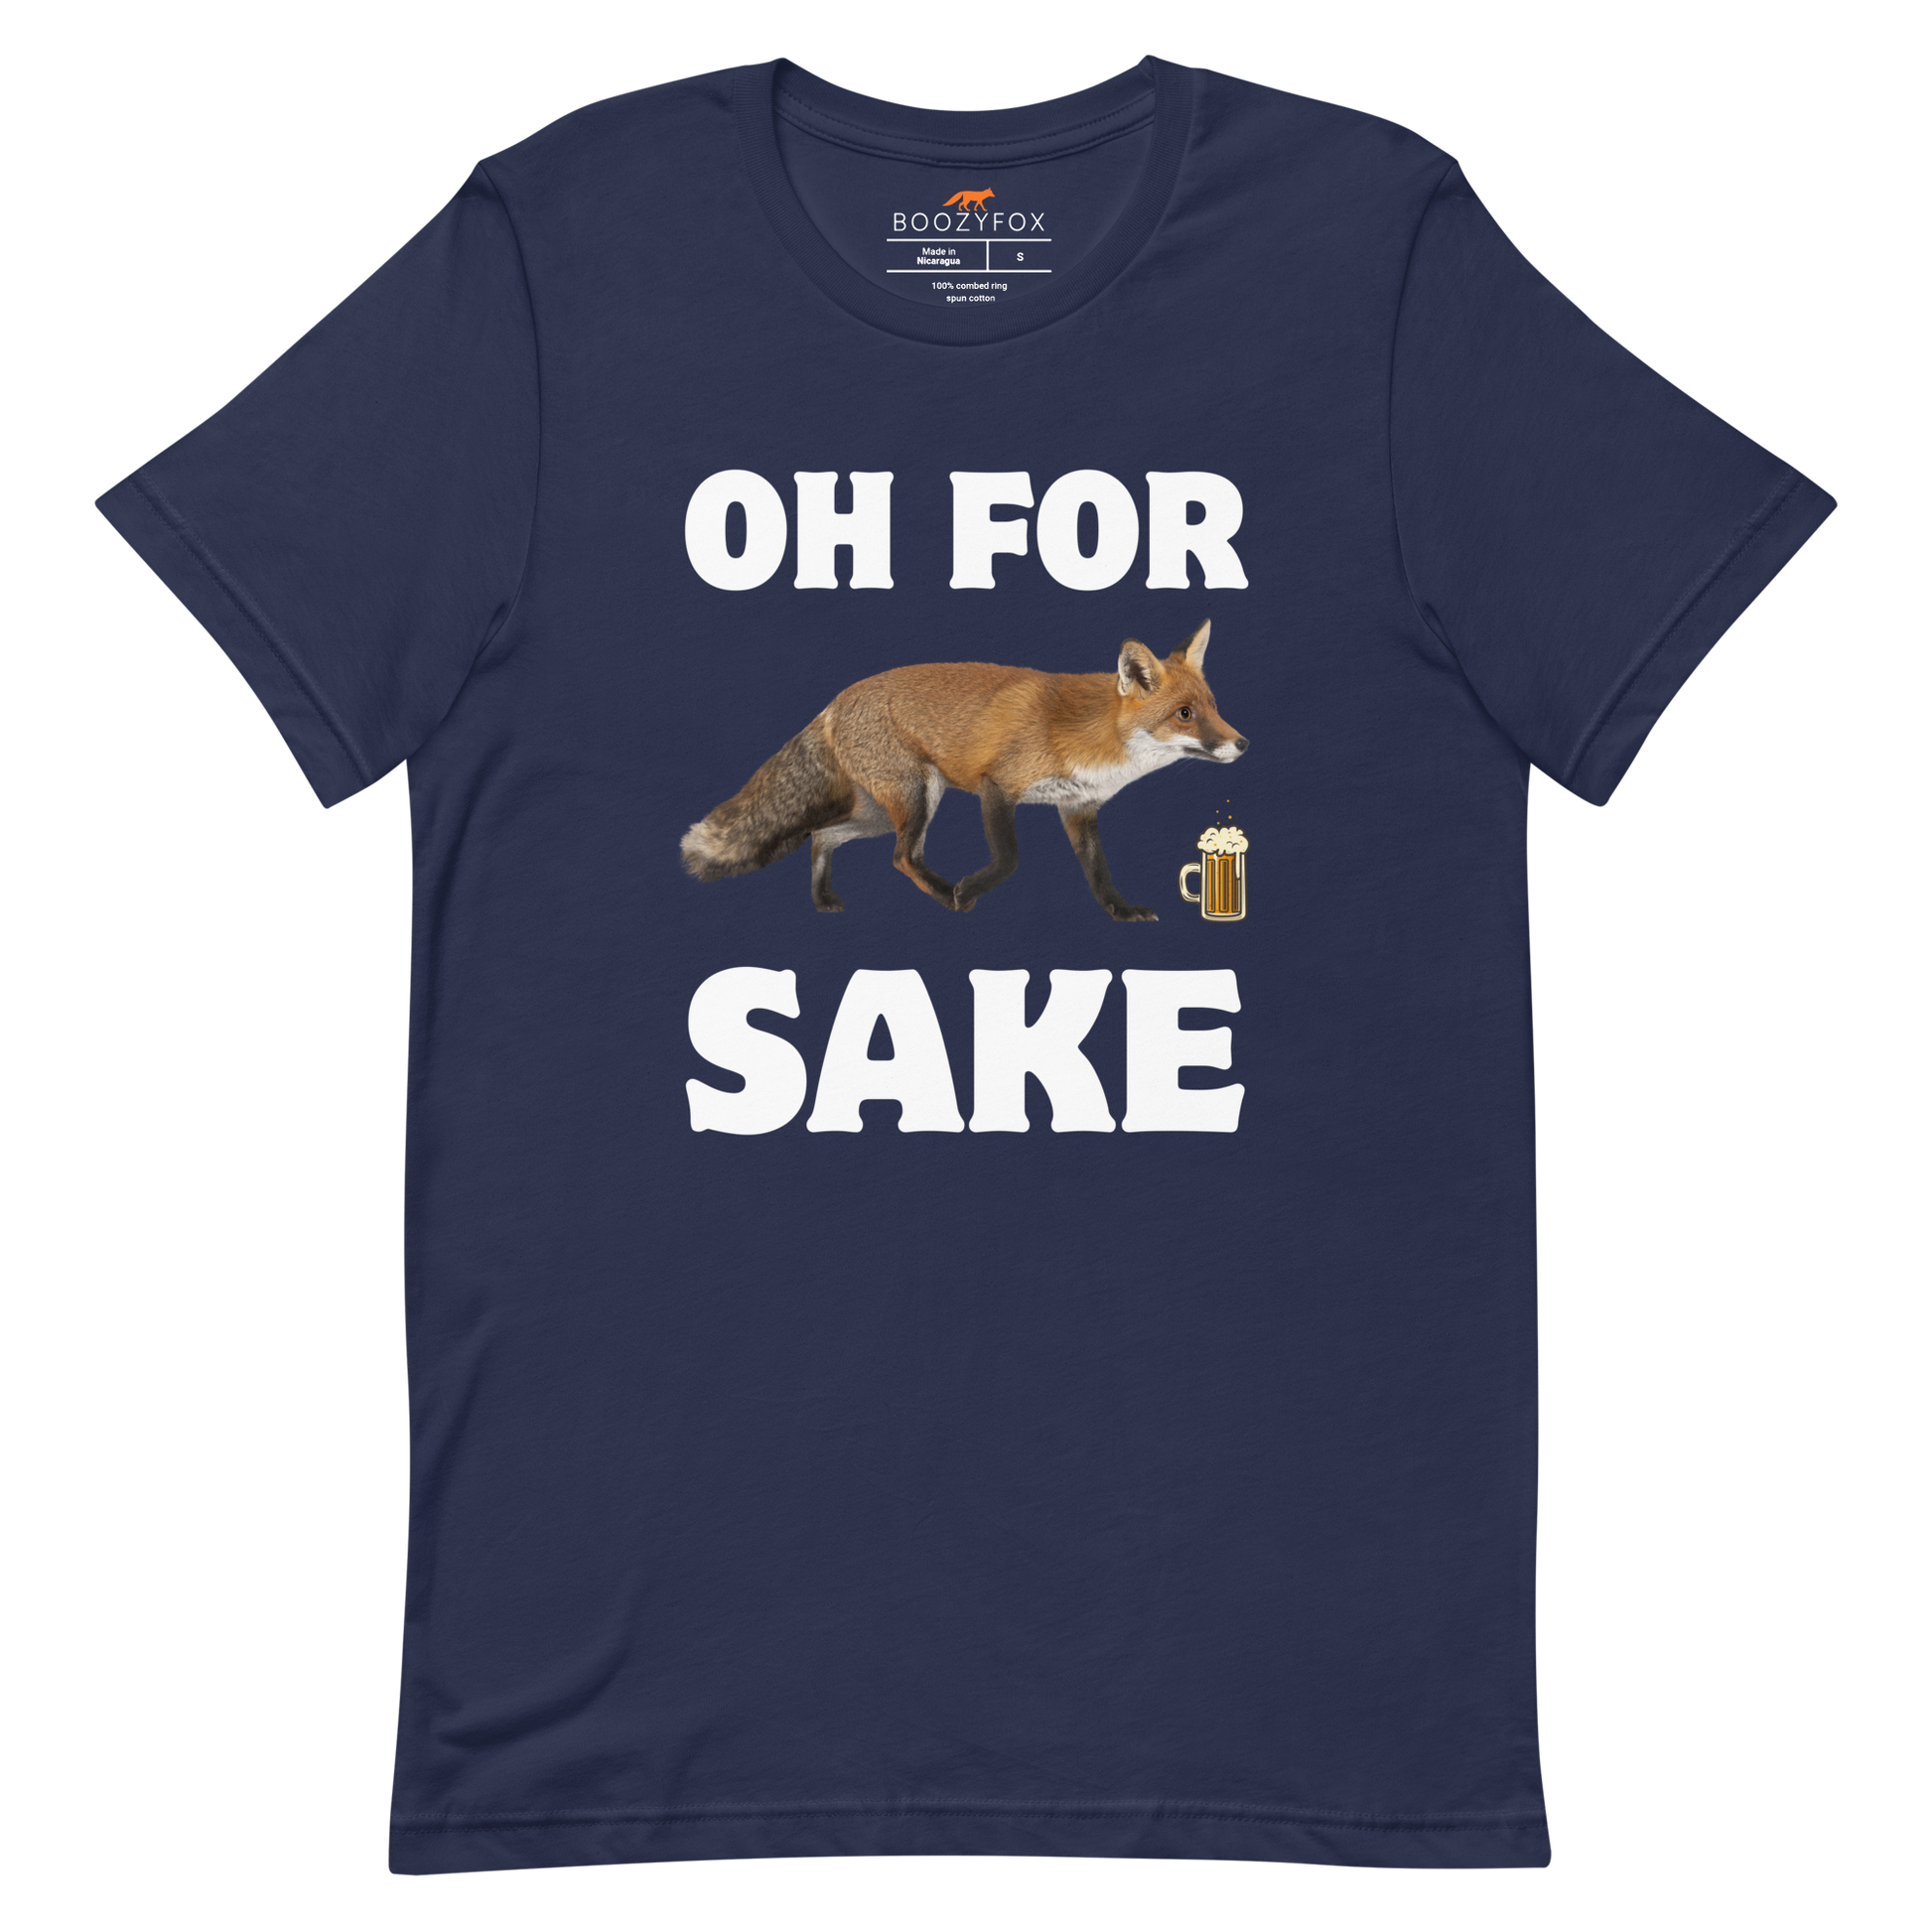 Navy Premium Fox T-Shirt featuring a Oh For Fox Sake graphic on the chest - Funny Graphic Fox Tees - Boozy Fox